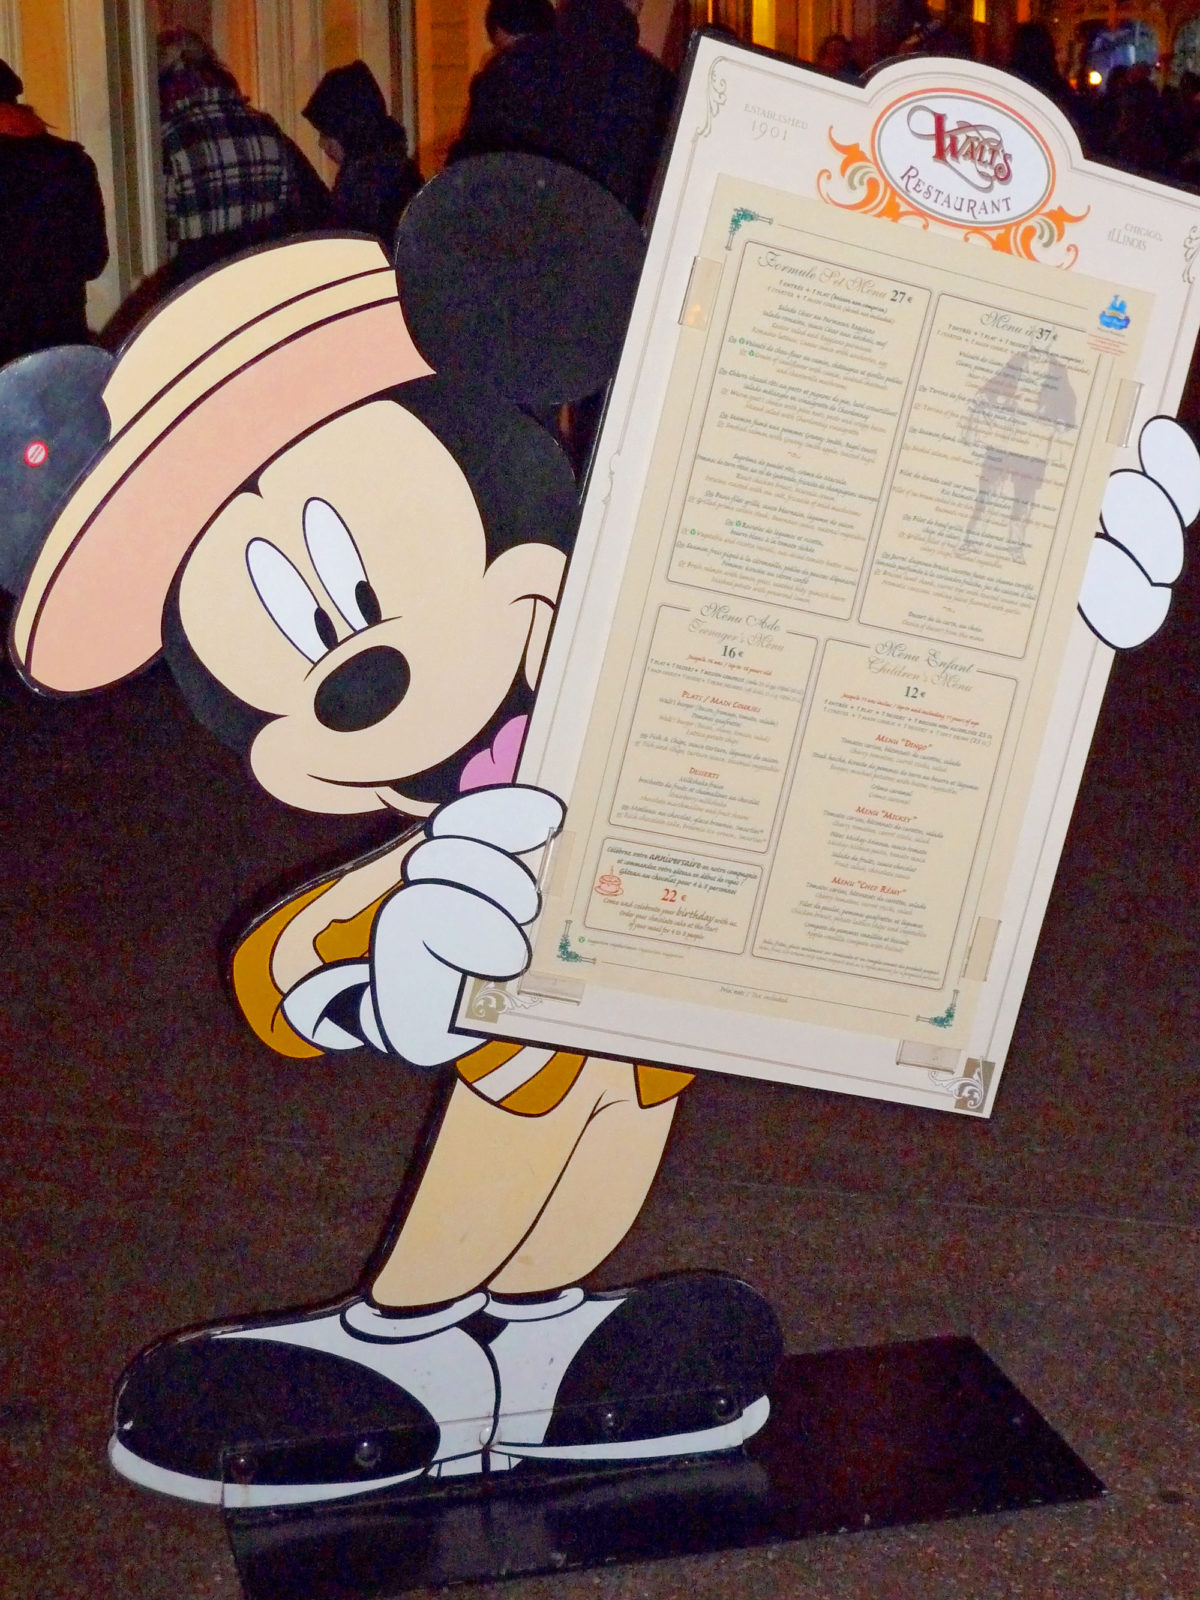 Image shows Mickey Mouse sign holding the menu for walt's restaurant in disneyland paris.